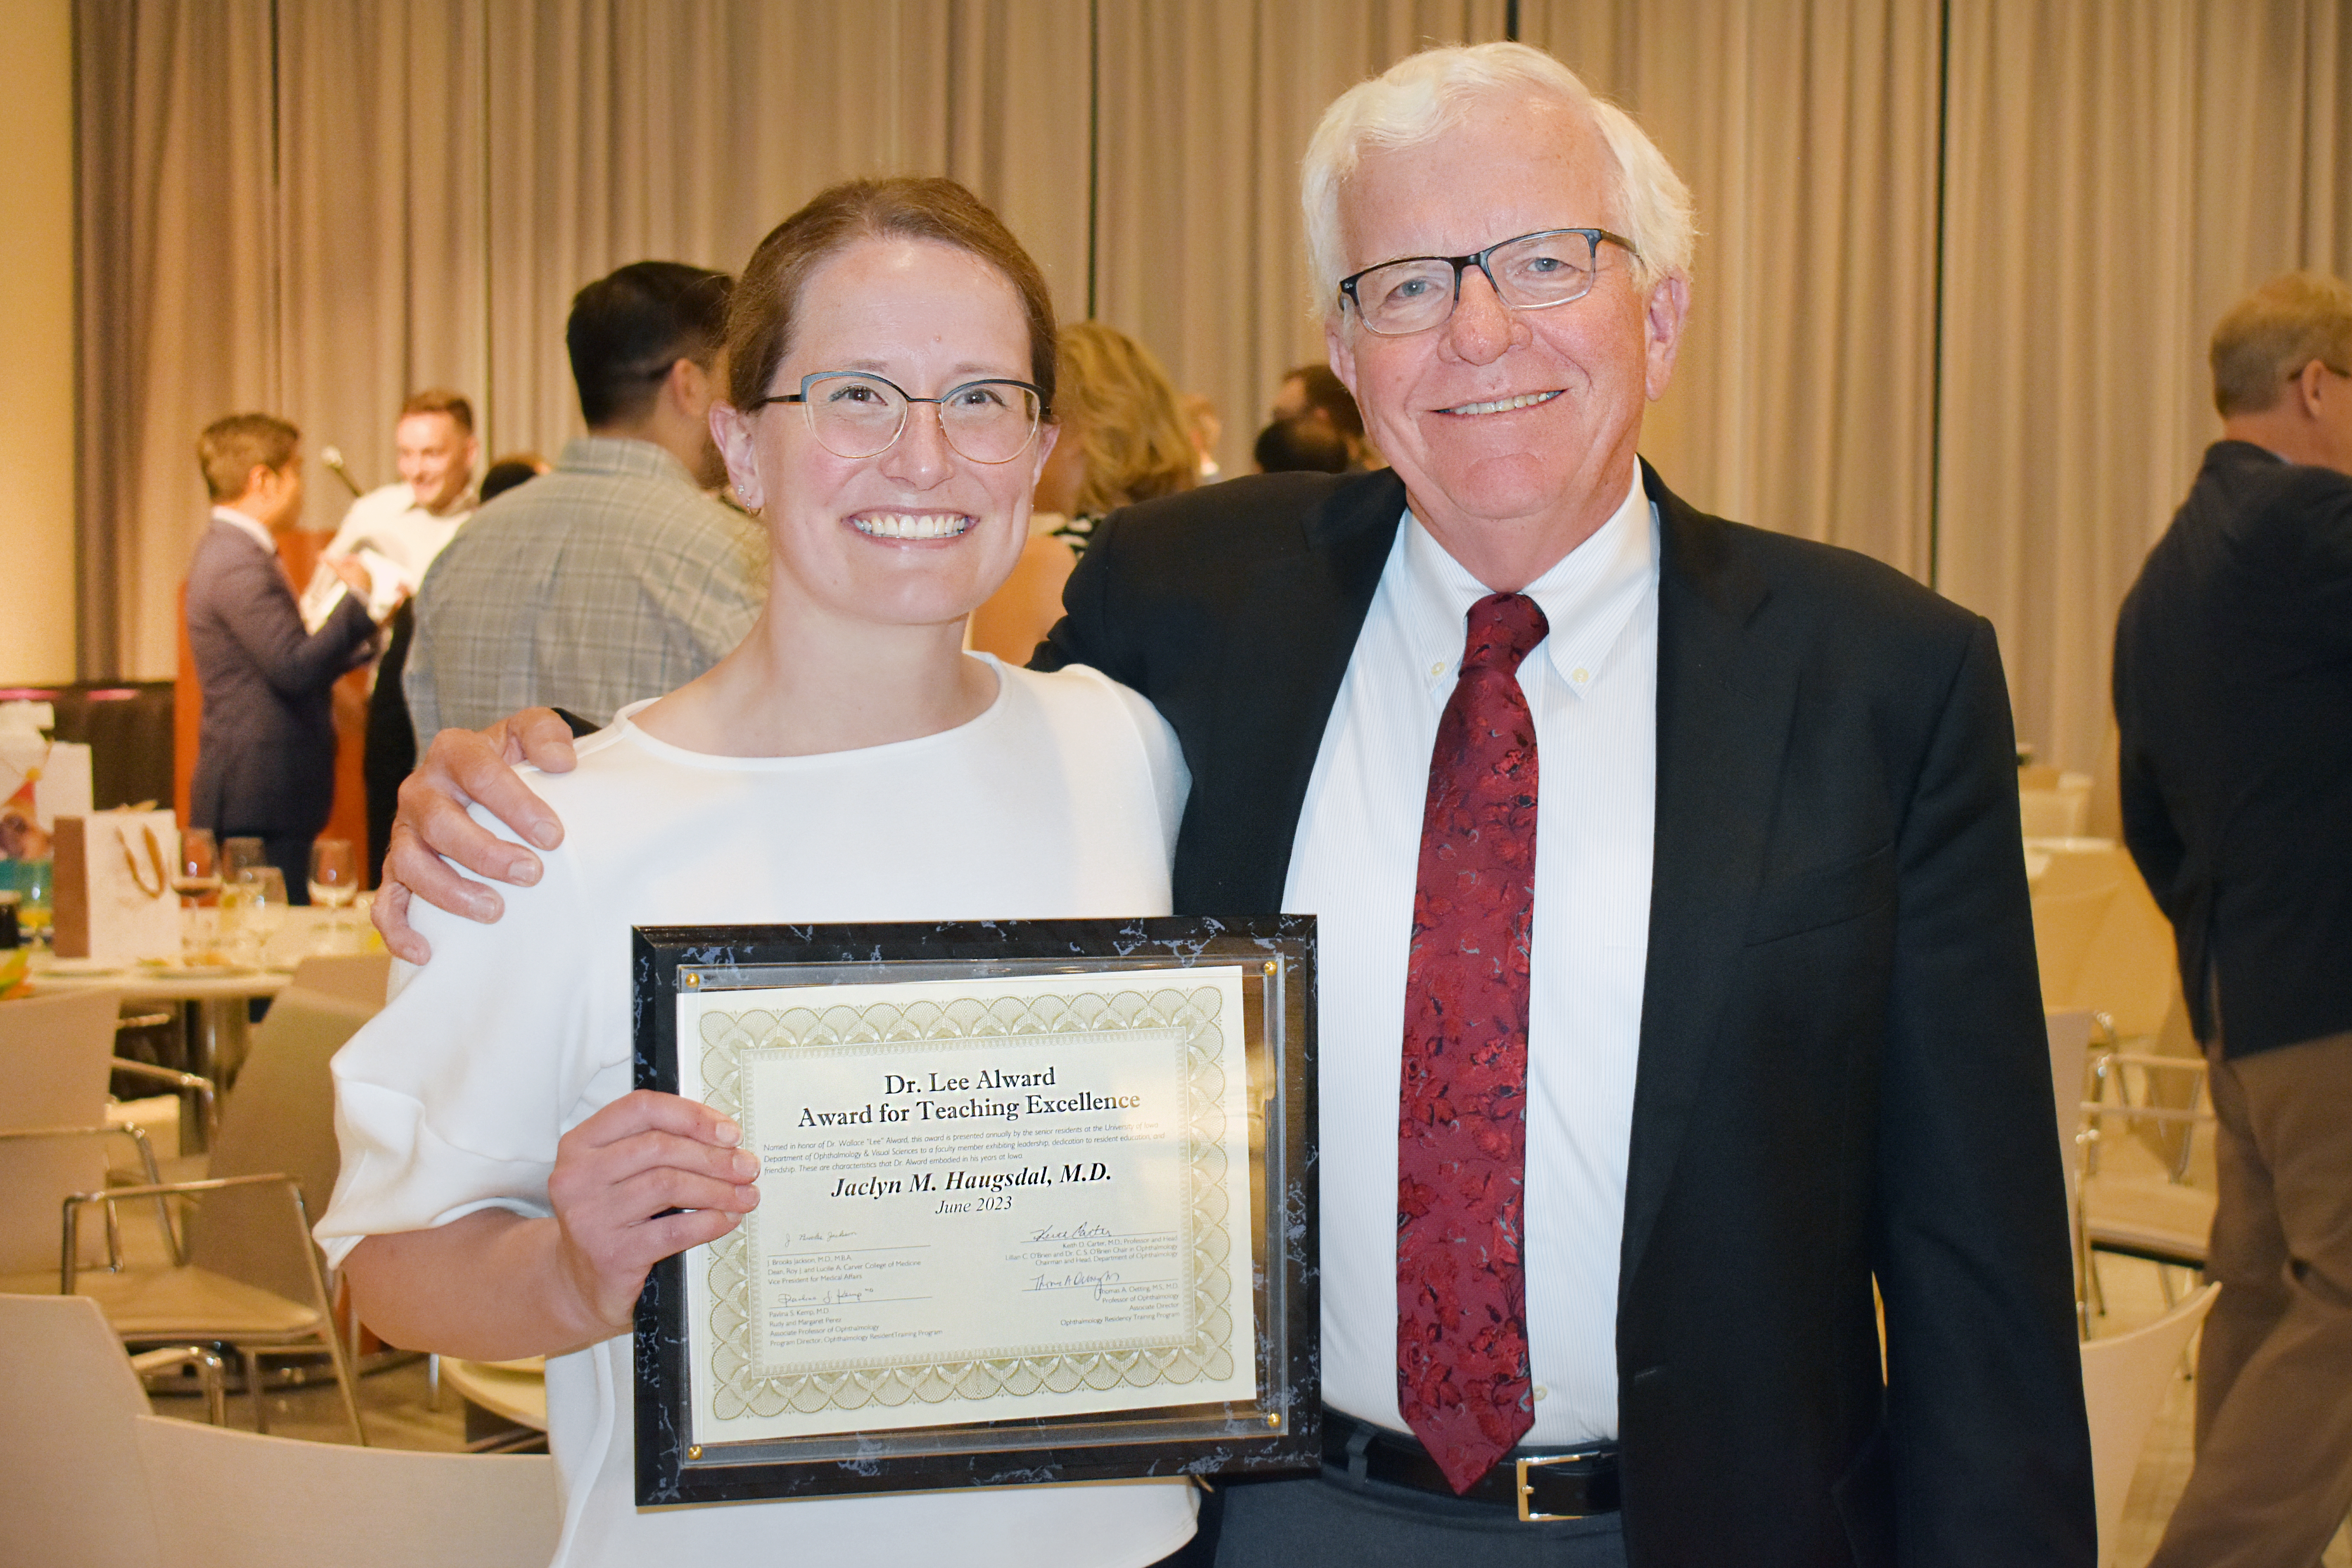 Dr. Jaclyn Haugsdal received the inaugural Dr. Lee Alward Award for Teaching Excellence